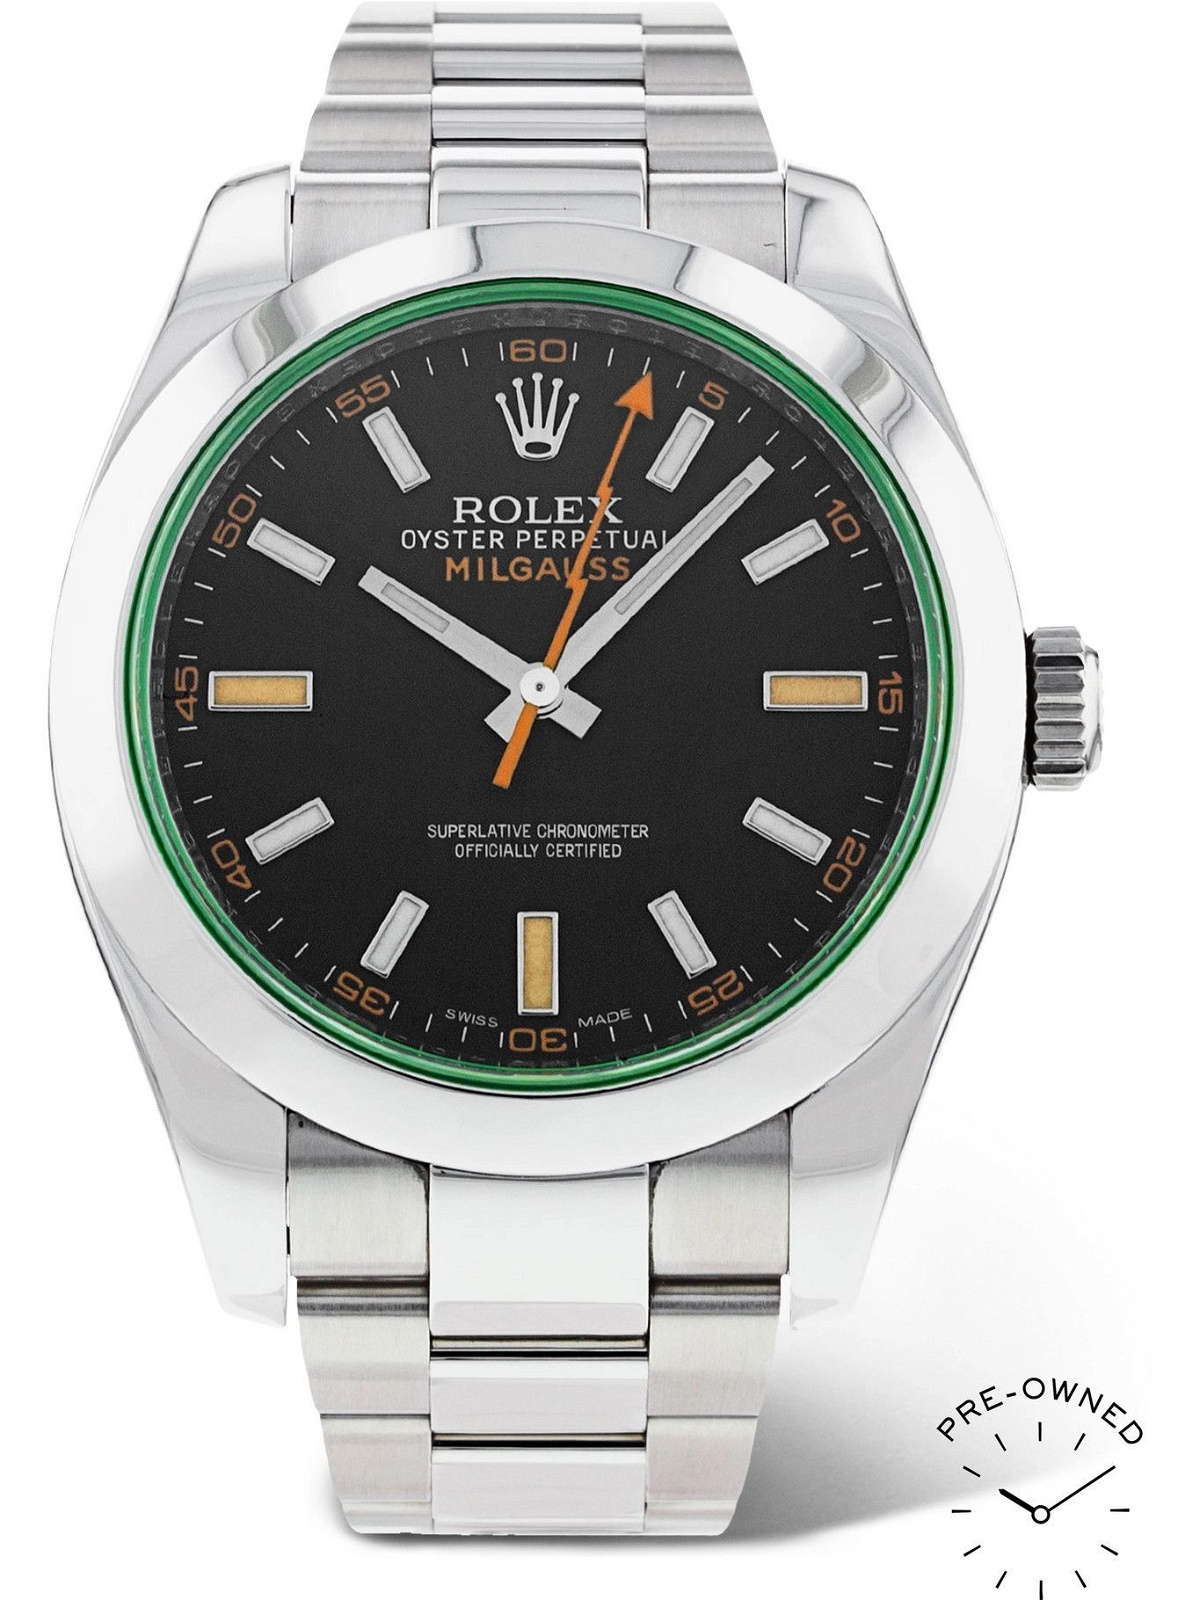 ROLEX - Pre-Owned 2013 Milgauss Automatic 40mm Oystersteel Watch, Ref. No. 116400 GV